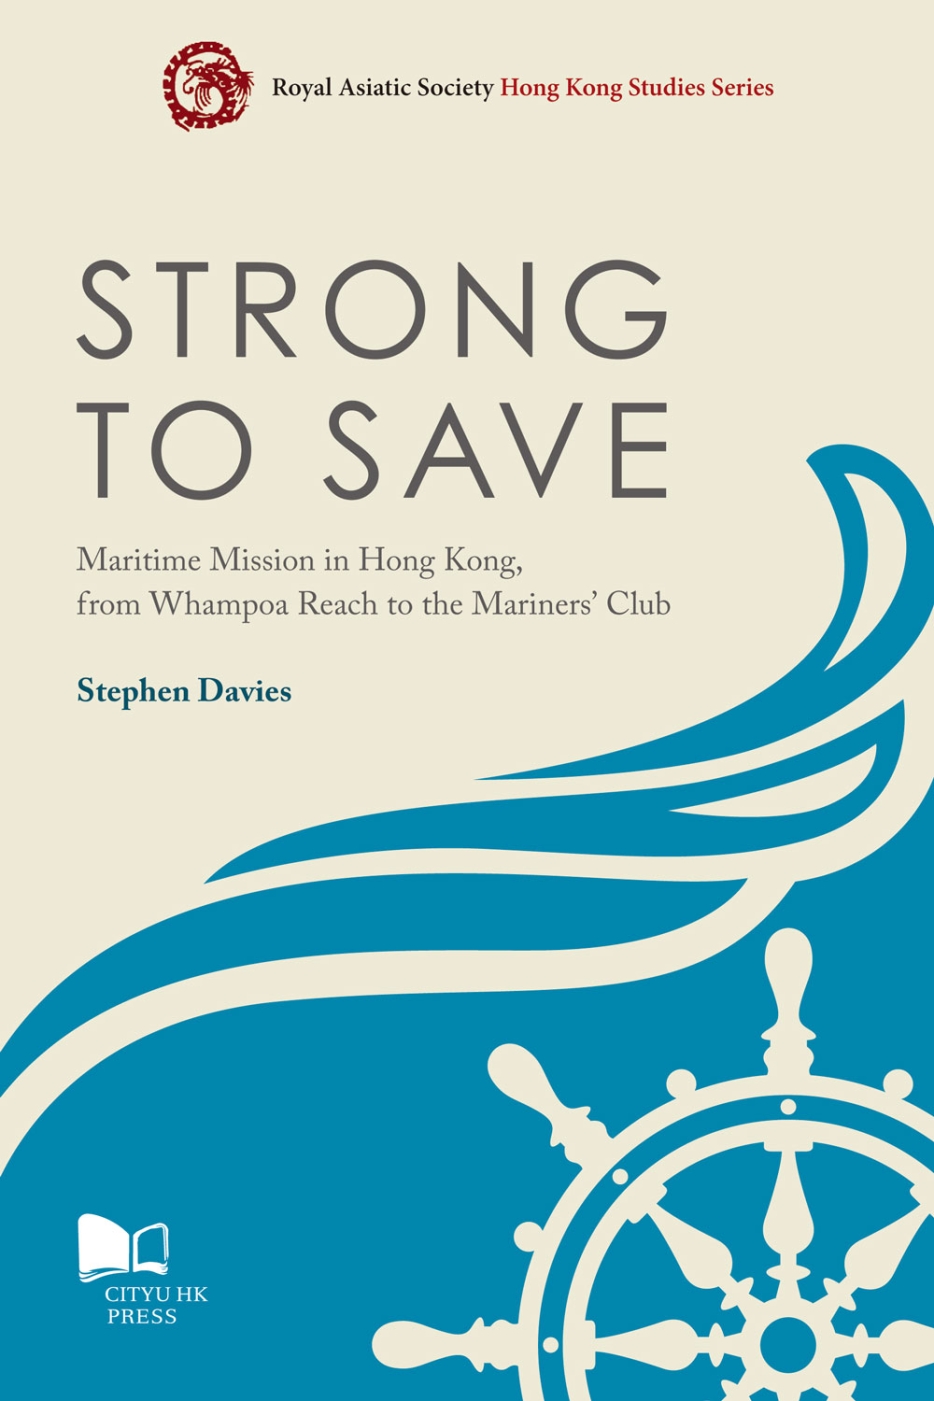 Strong to Save: Maritime Mission in Hong Kong from Whampoa Reach to the Mariners’ Club